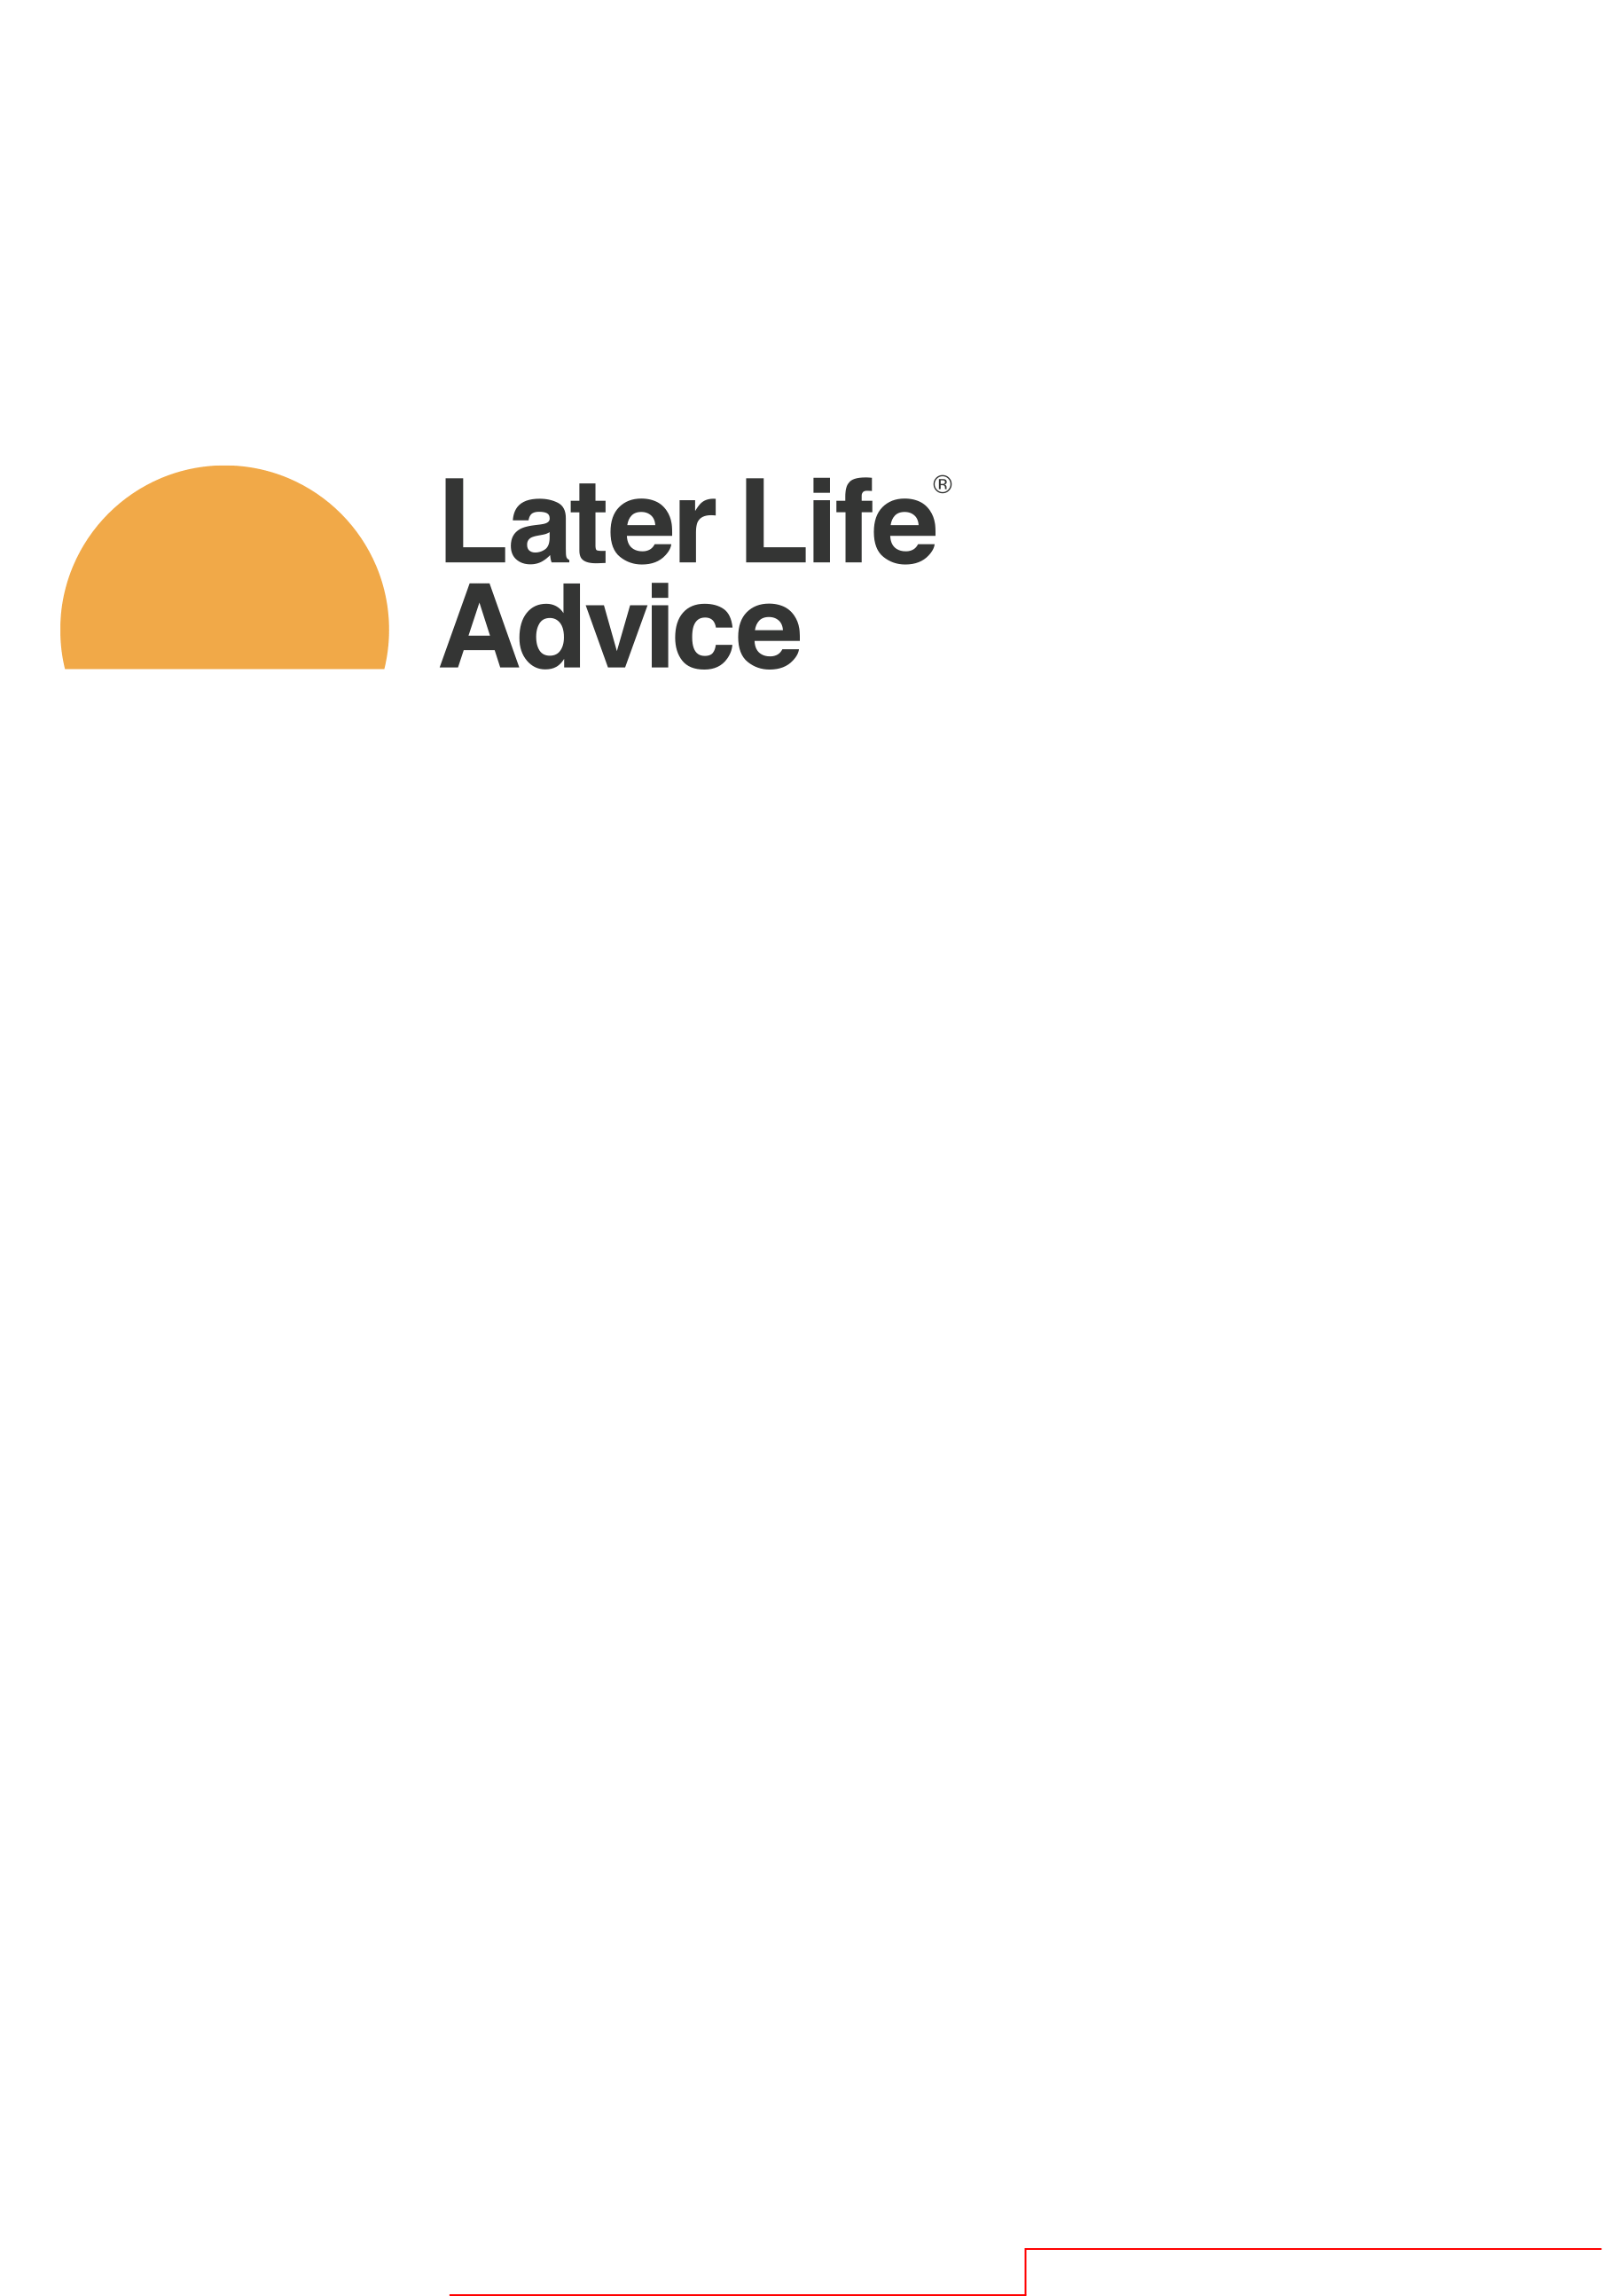 Later Life Advice - A DR Care Solutions Partner